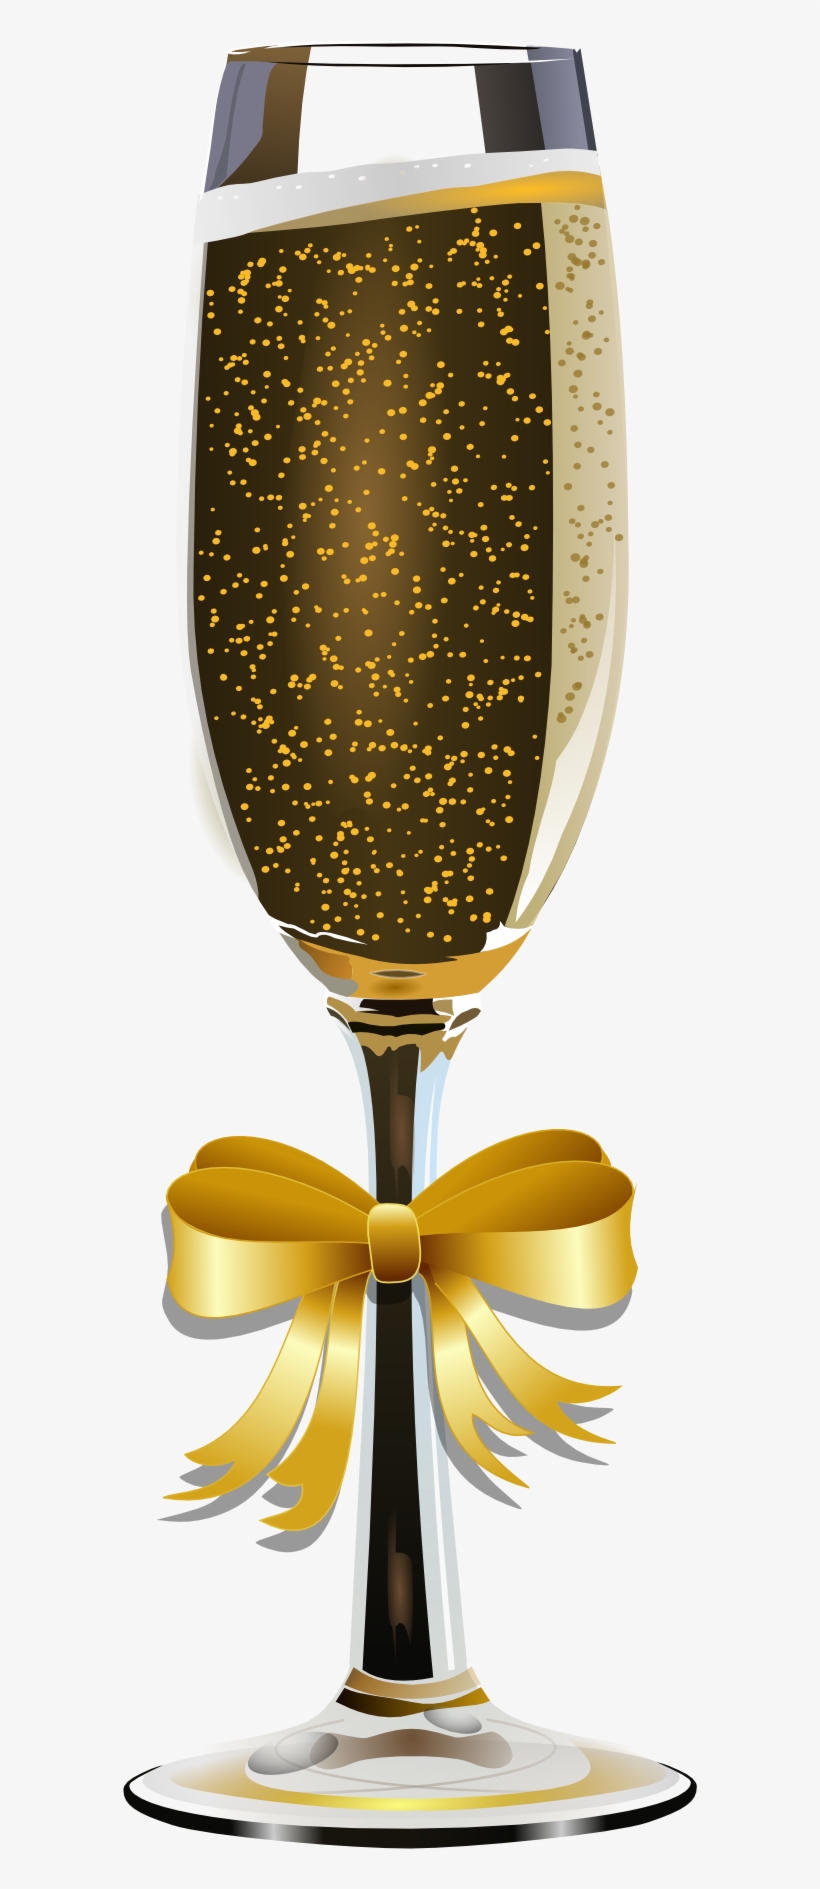 Champagne Glass Clip Art With Bubbles - Cafepress Champagne Glass Sticker, transparent png #3366162